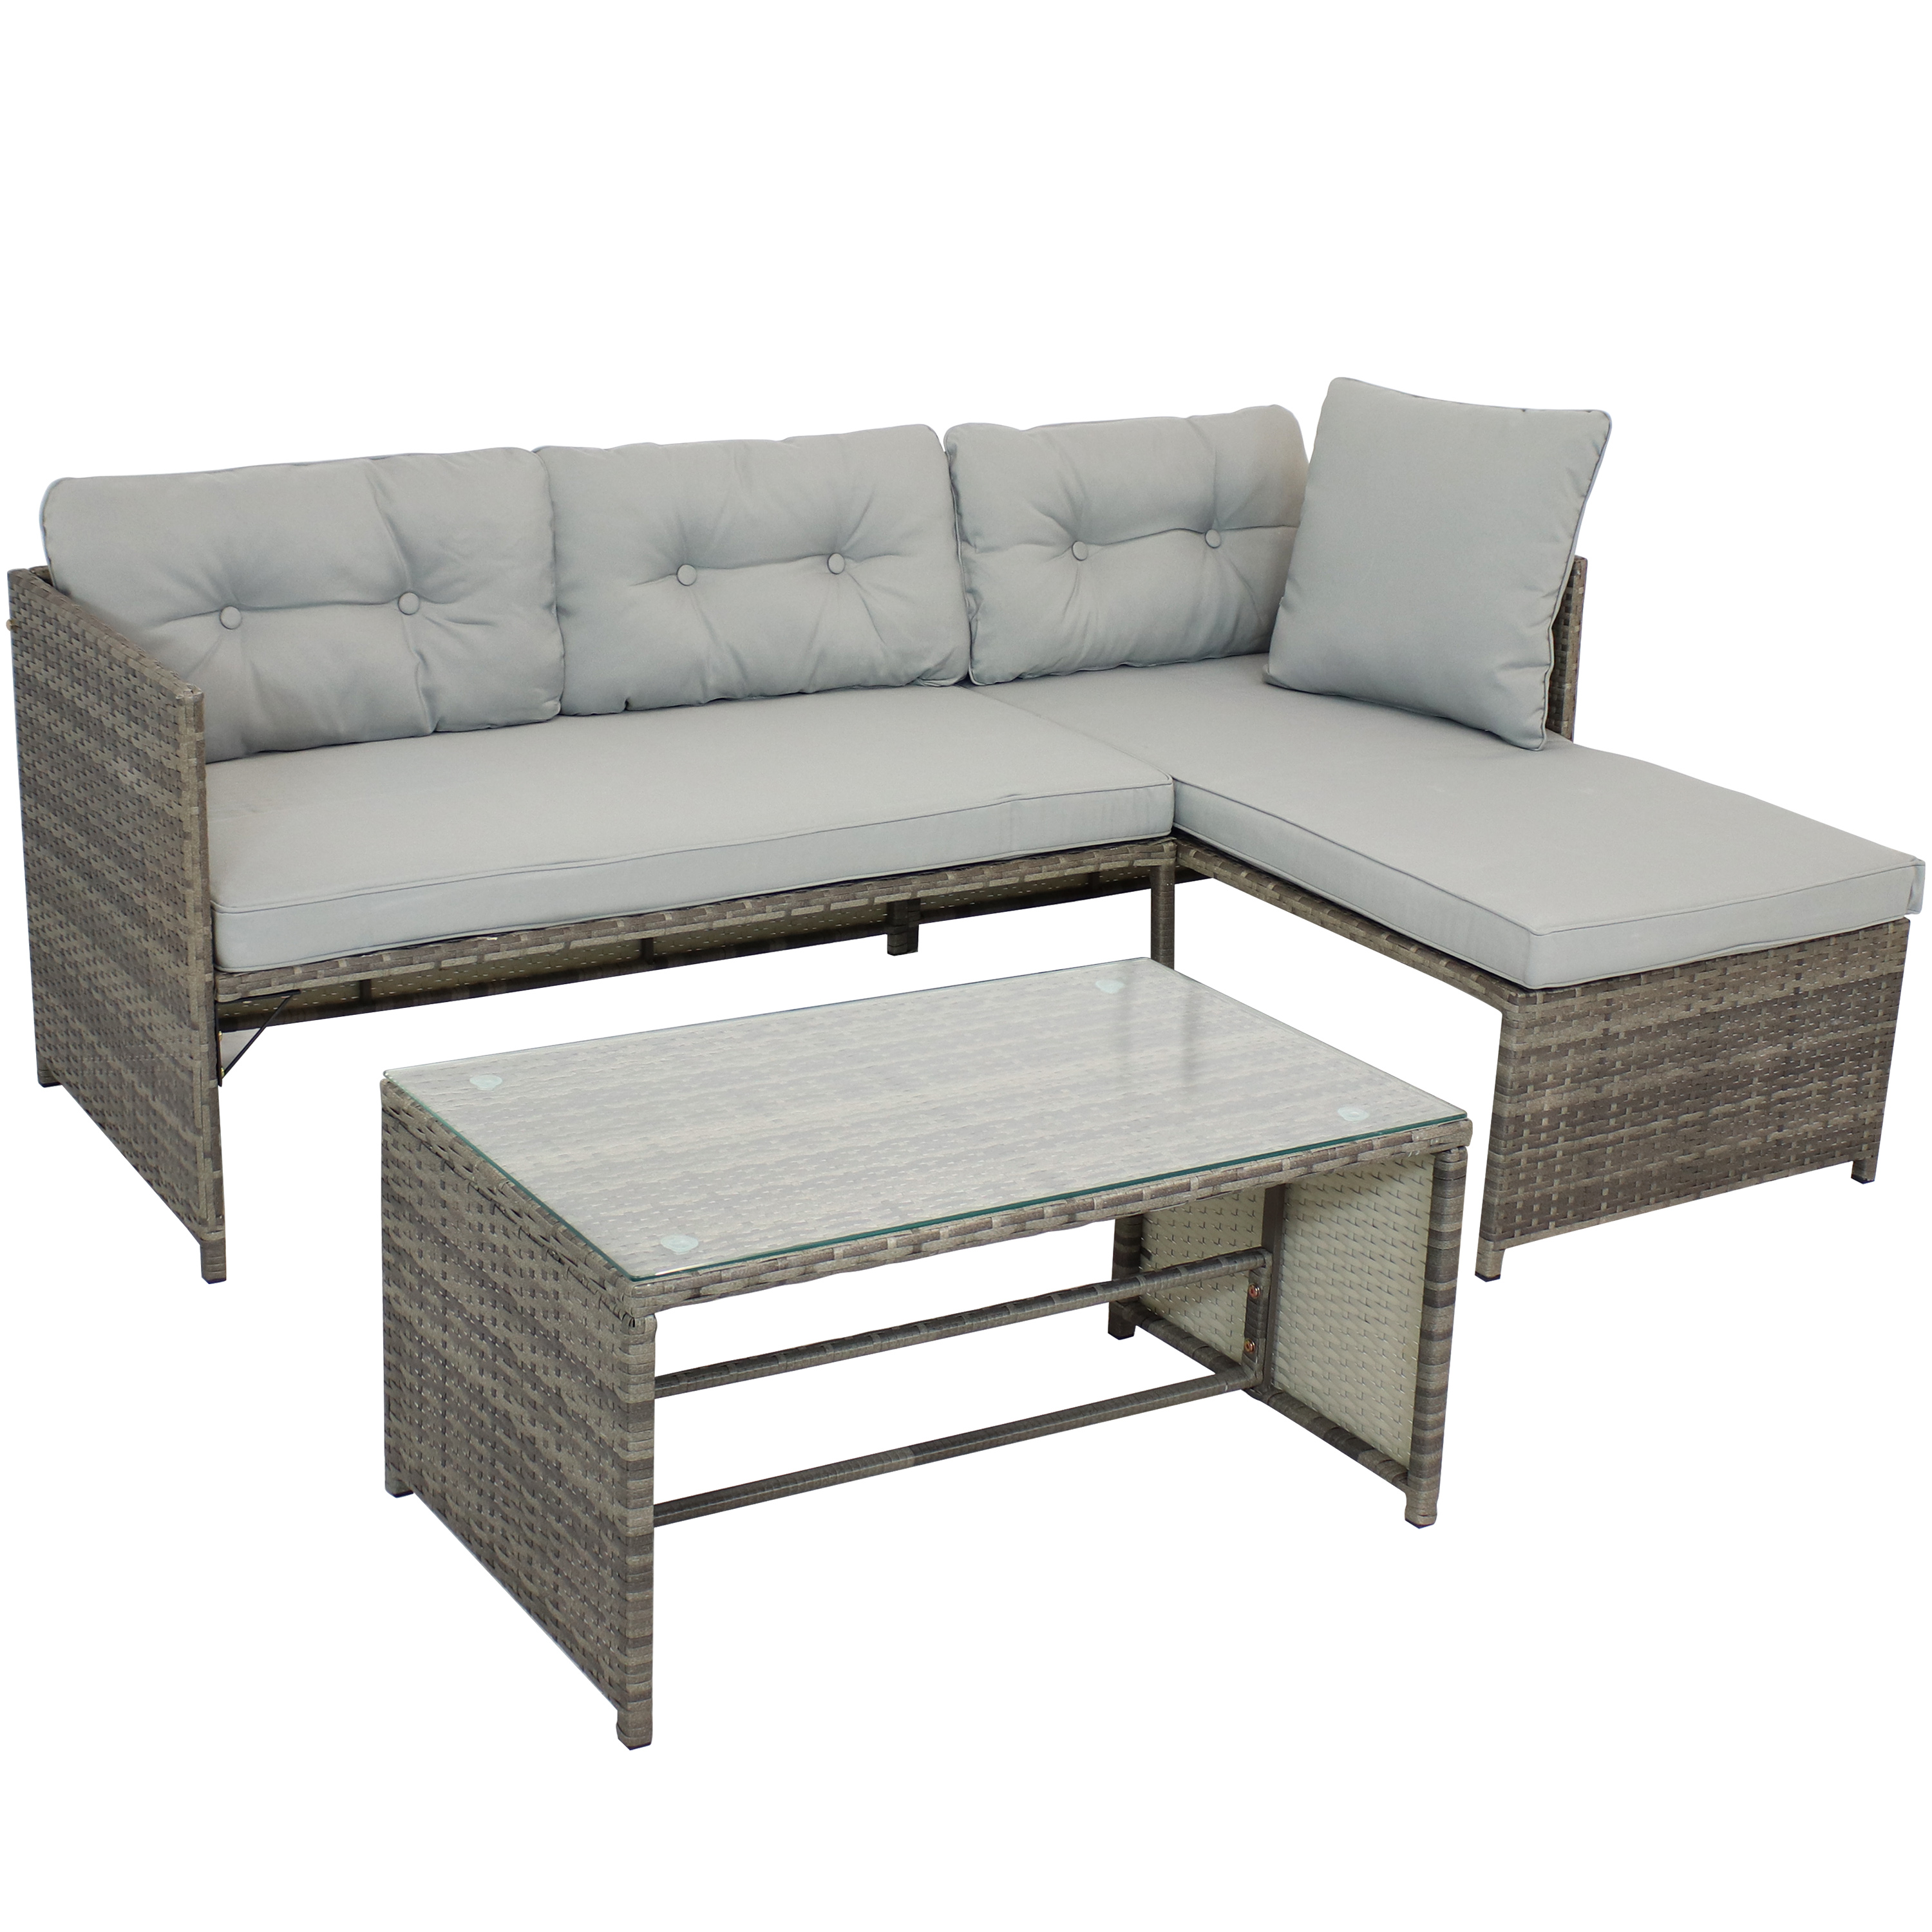 Sunnydaze Outdoor Longford Patio Sectional Sofa Conversation Set with Cushions and Table - Stone Gray - 3pc - image 1 of 11